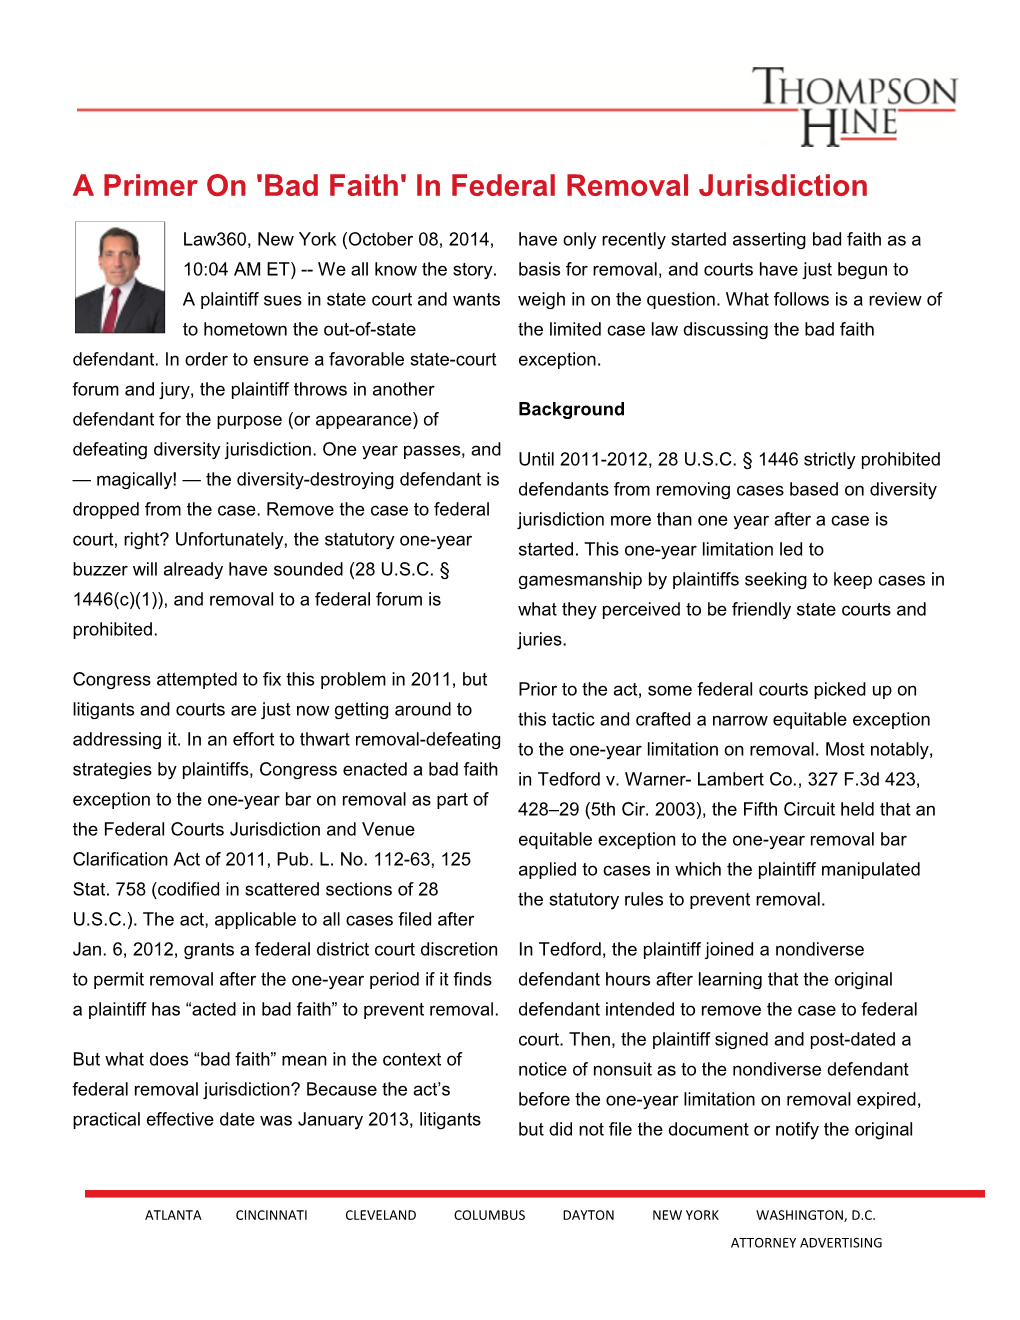 'Bad Faith' in Federal Removal Jurisdiction